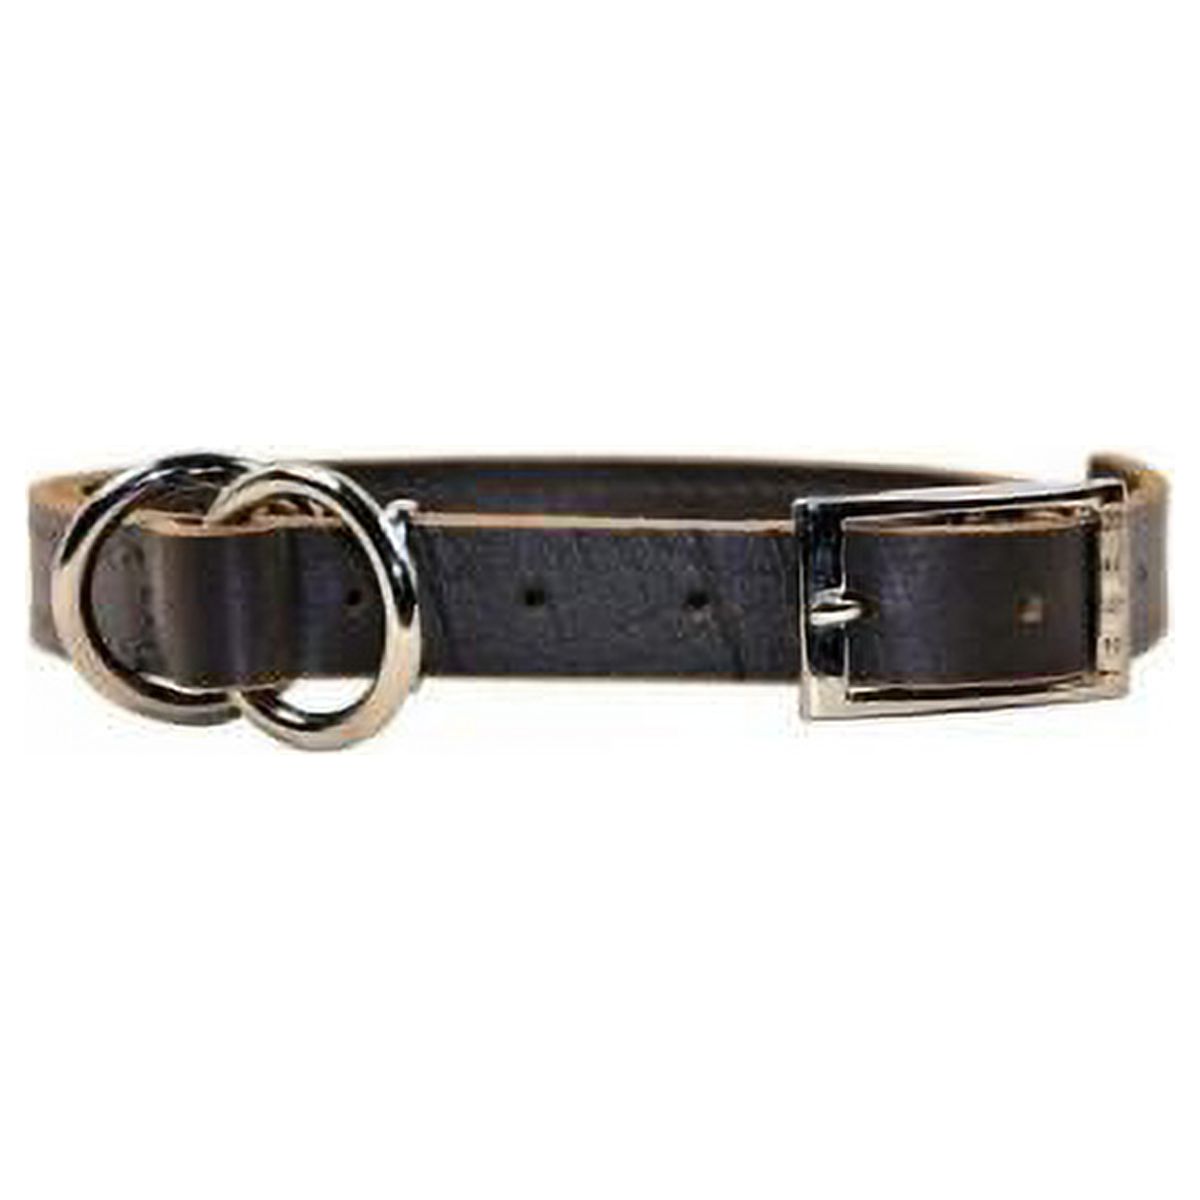 Dean & Tyler 729440752293 1 in. Strictly Business Nickel Flat Leather Collar&#44; Brown - 18 in. - image 1 of 1